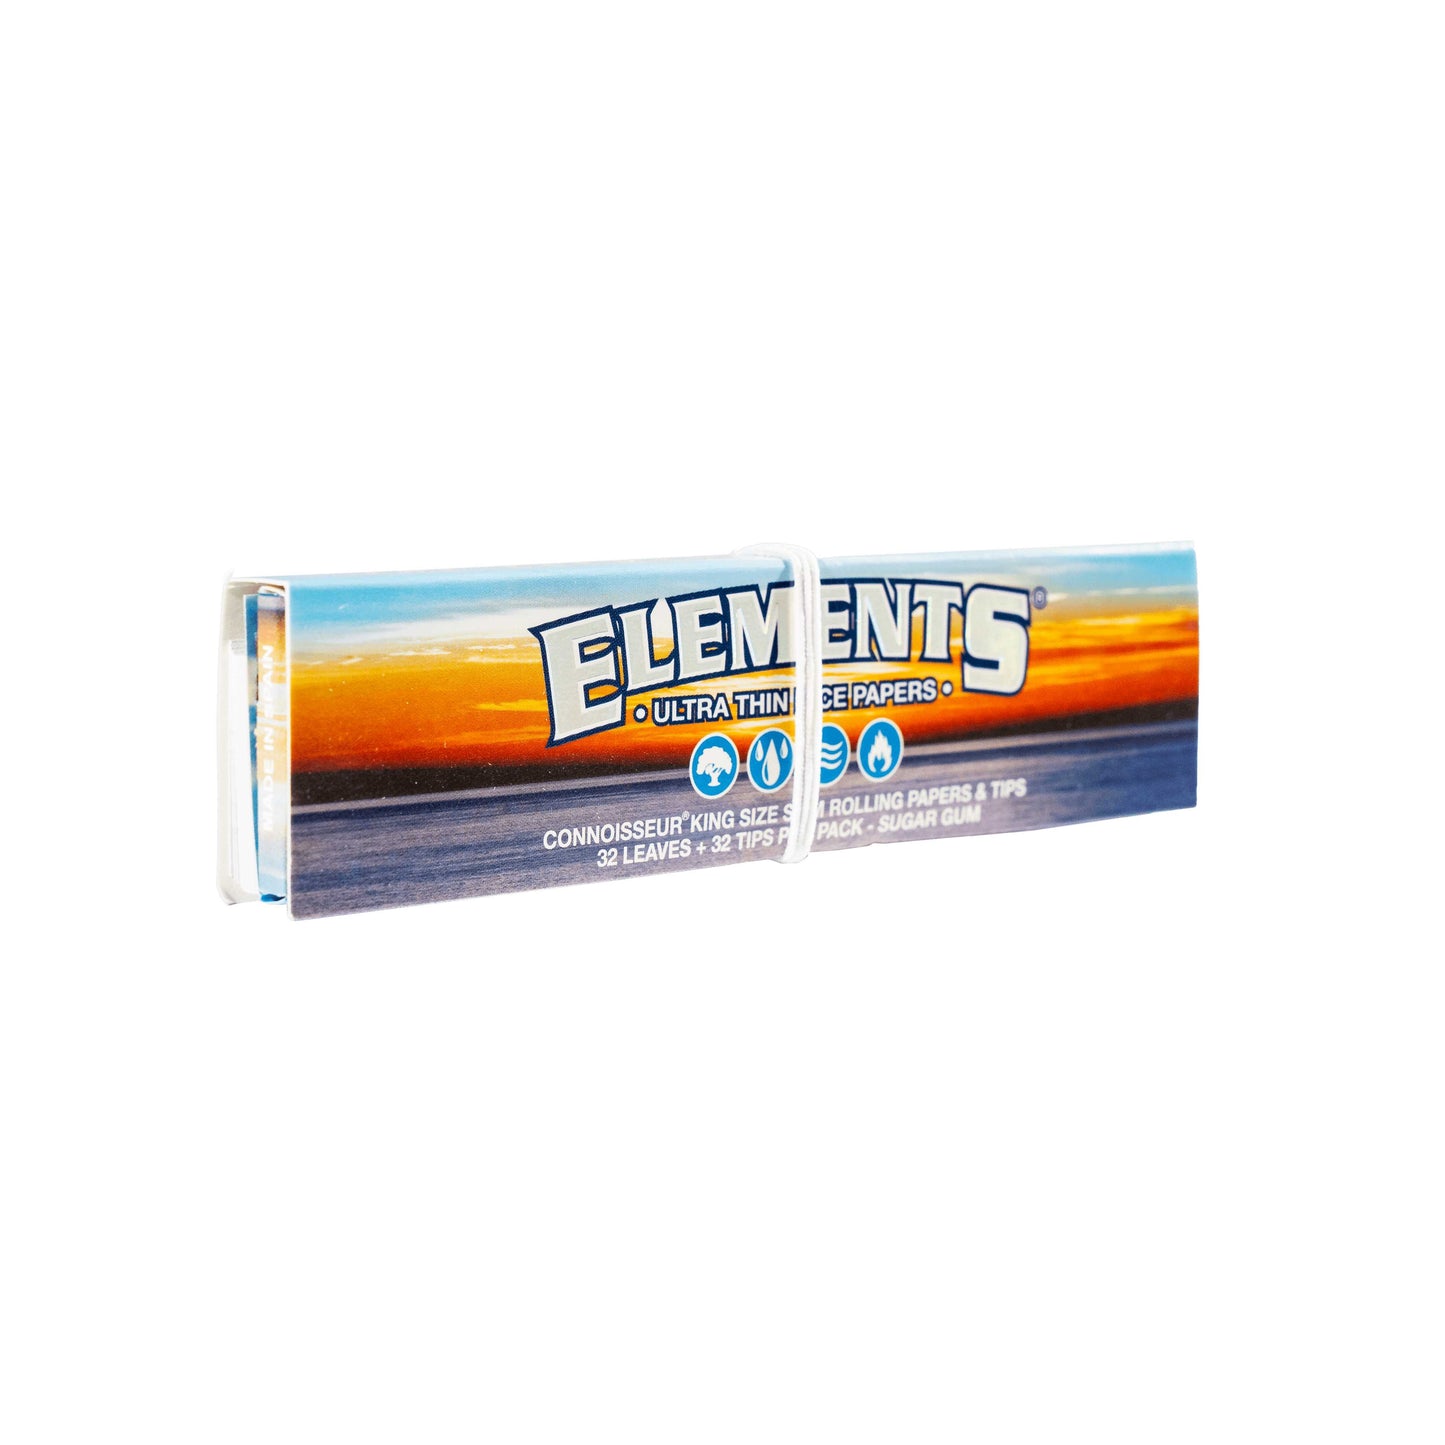 Elements Ultra Thin Rice Papers and Tips - King - Papers + Tips - Rolling Papers - Elements - Cali Tobacconist